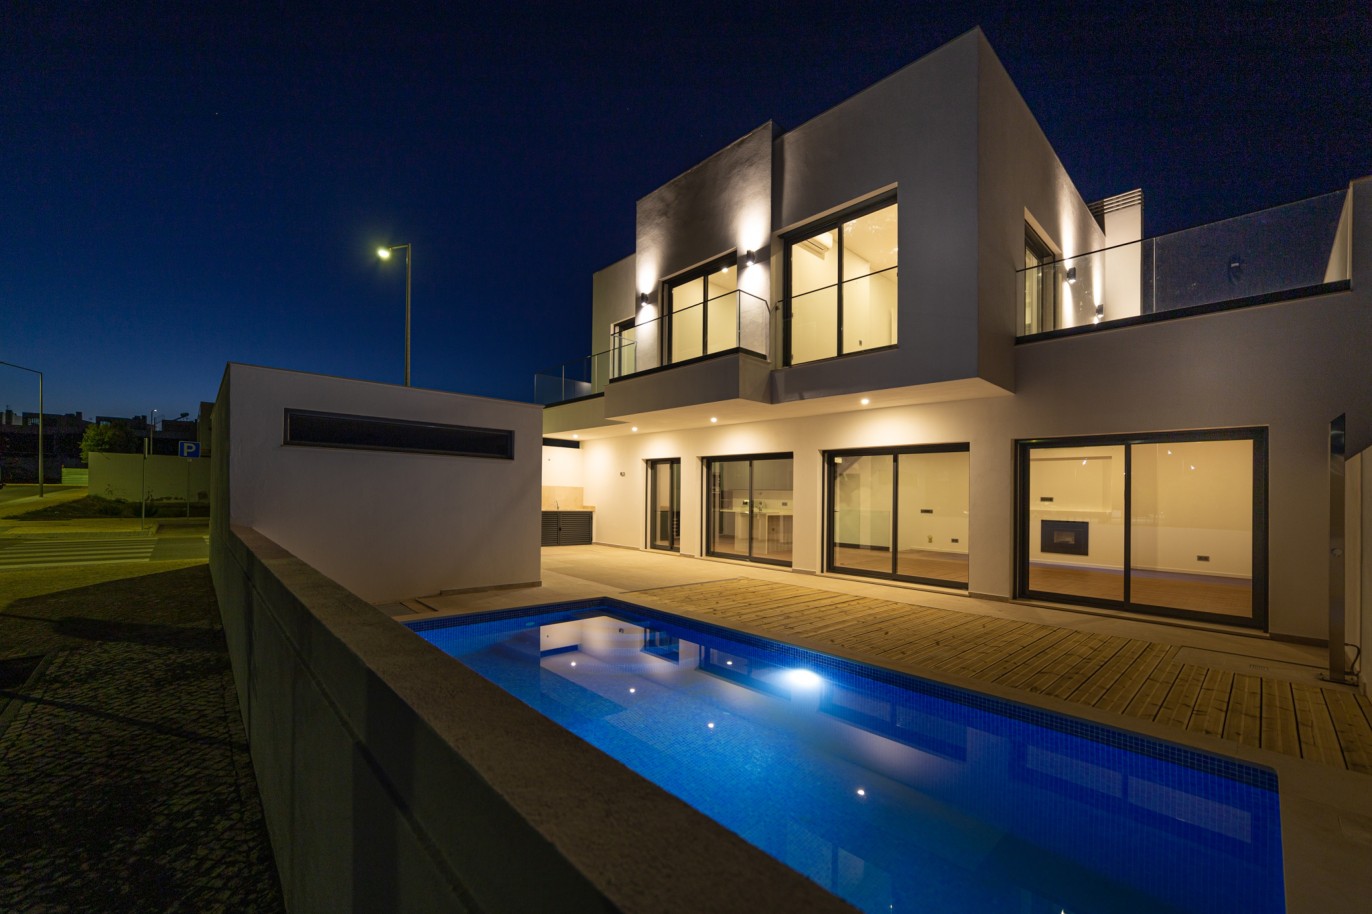 3 bedroom villa with pool and sea view, for sale in Tavira, Algarve_225845